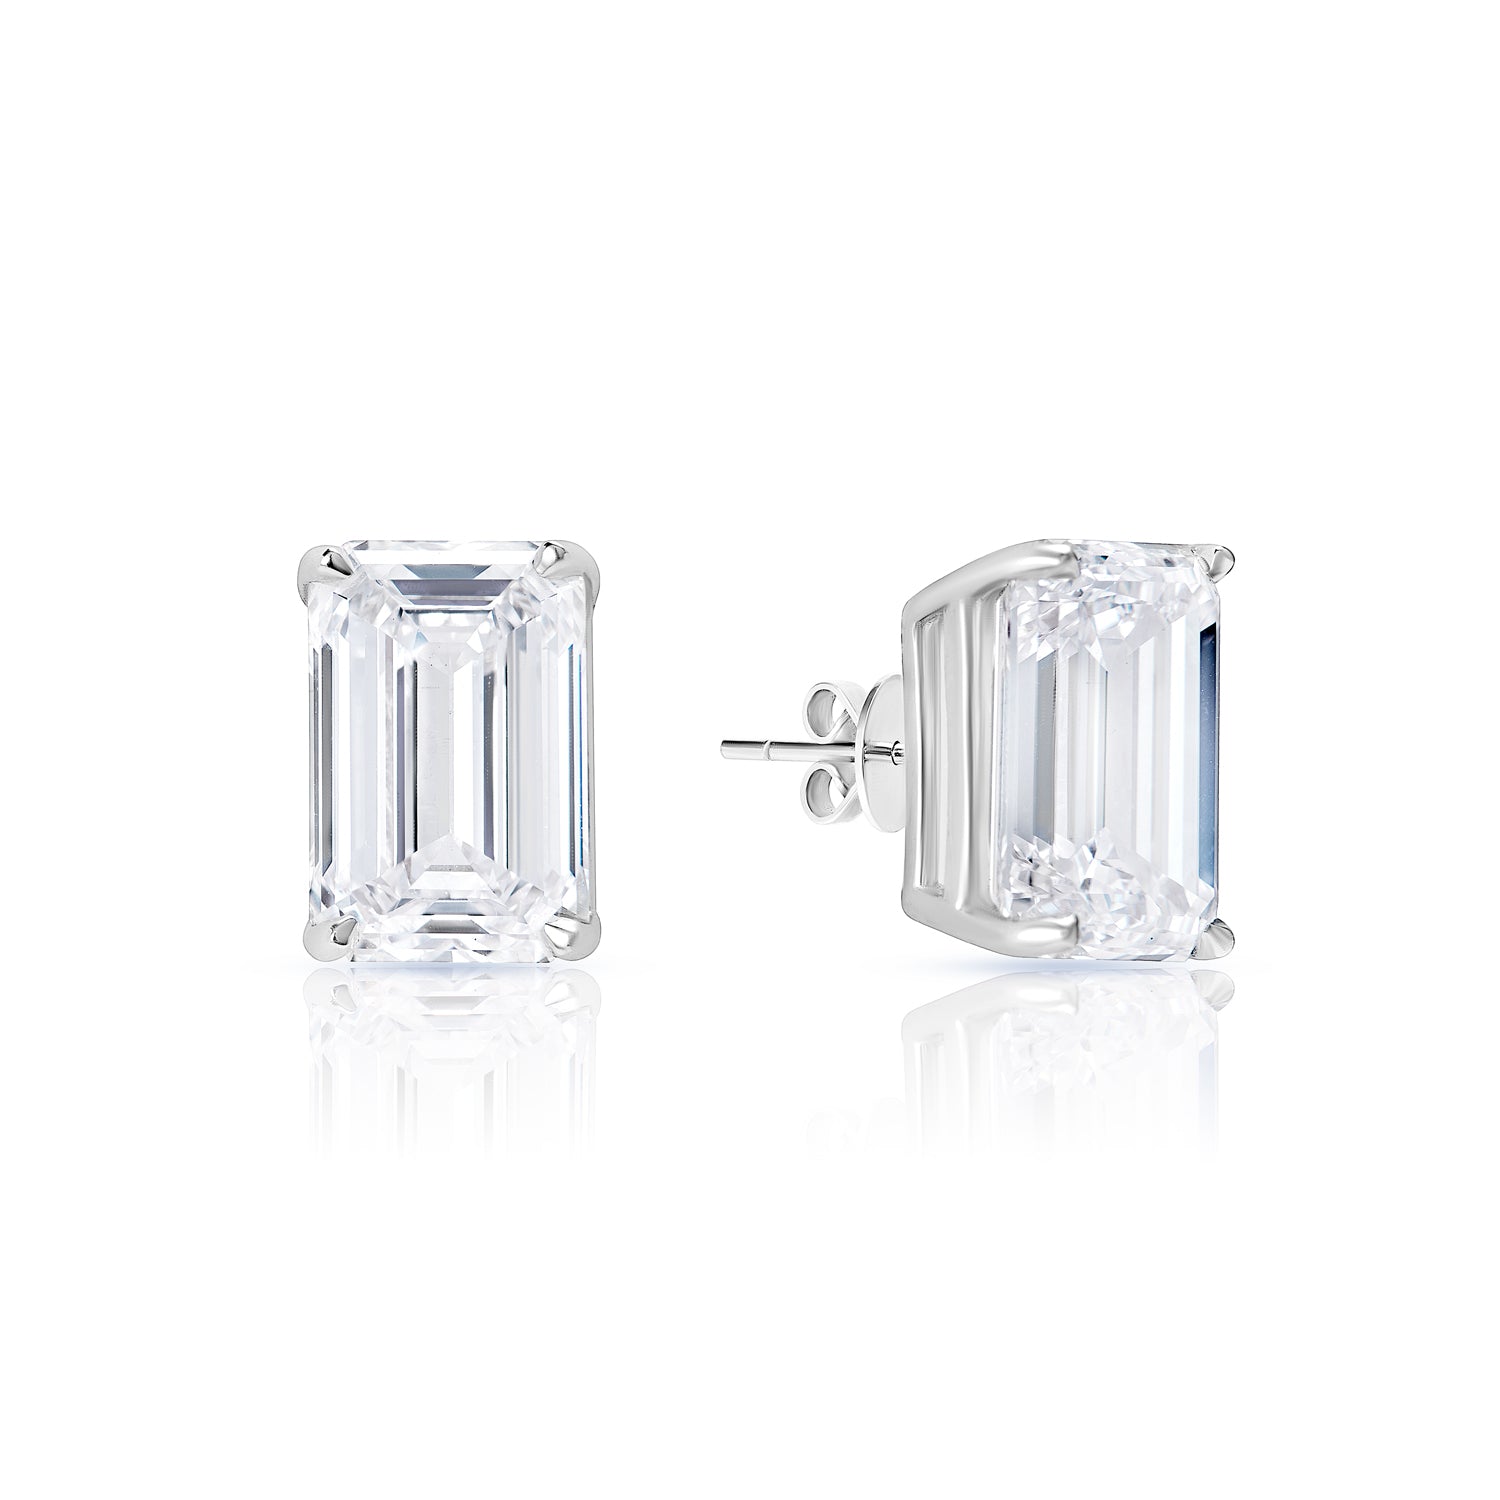 Lori 10 Carat Emerald Cut VS1 Lab Grown Diamond Stud Earrings in 14k White Gold Front and Side View